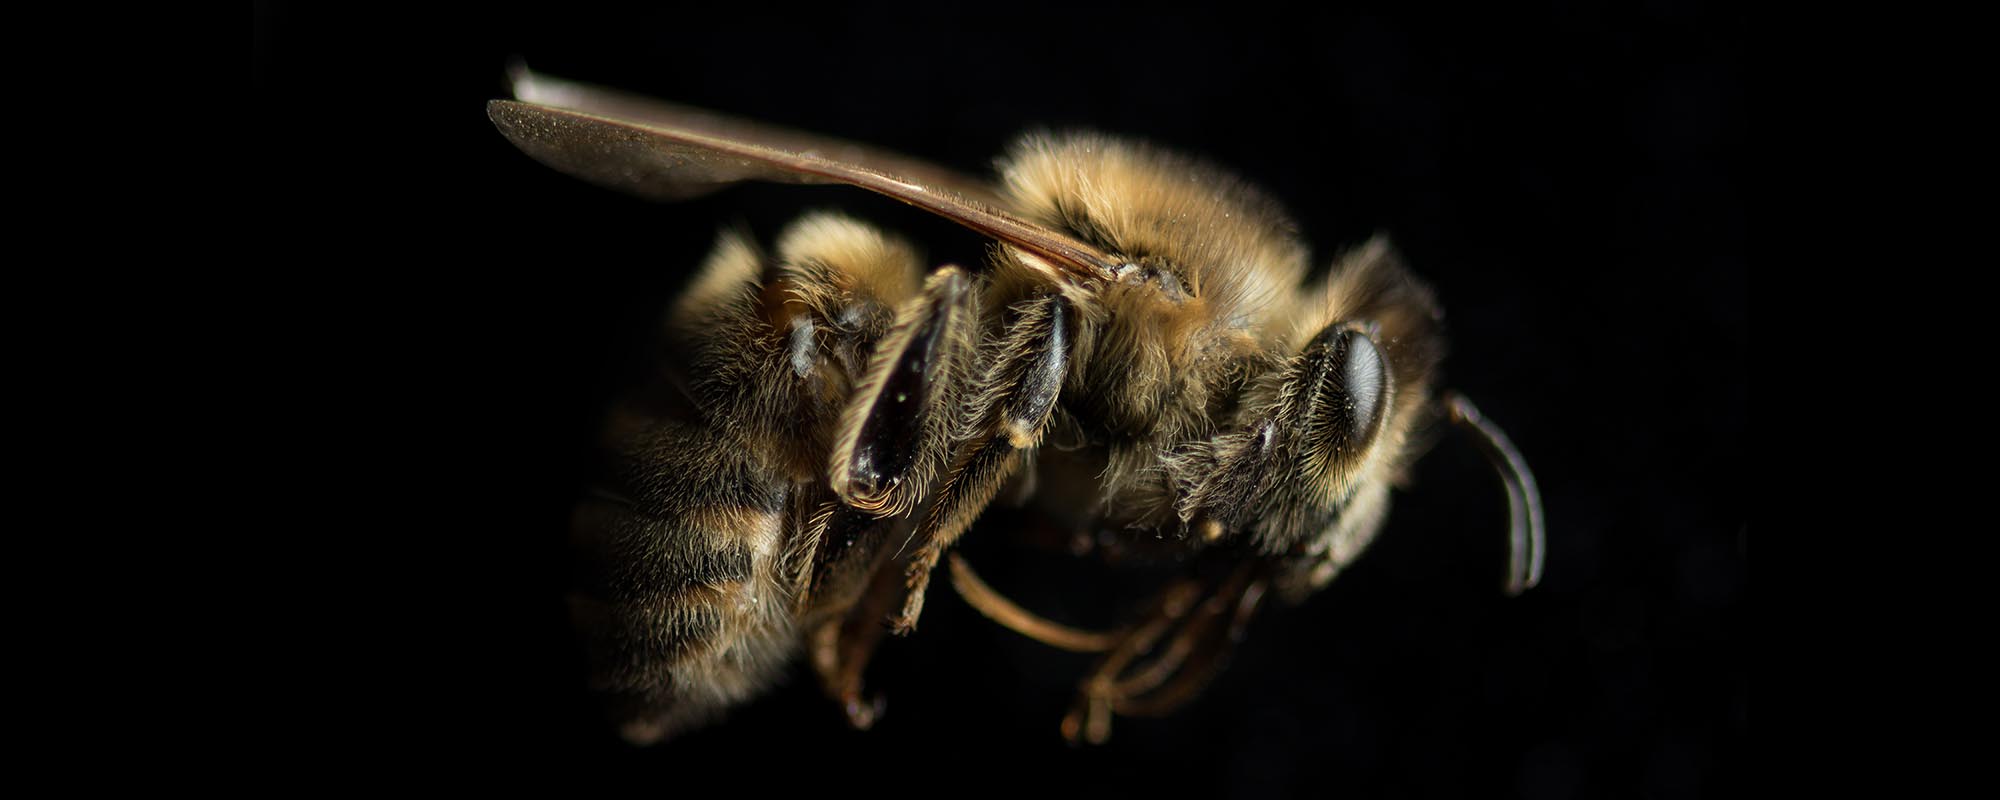 11 Things People Believe About Bees That Aren’t True